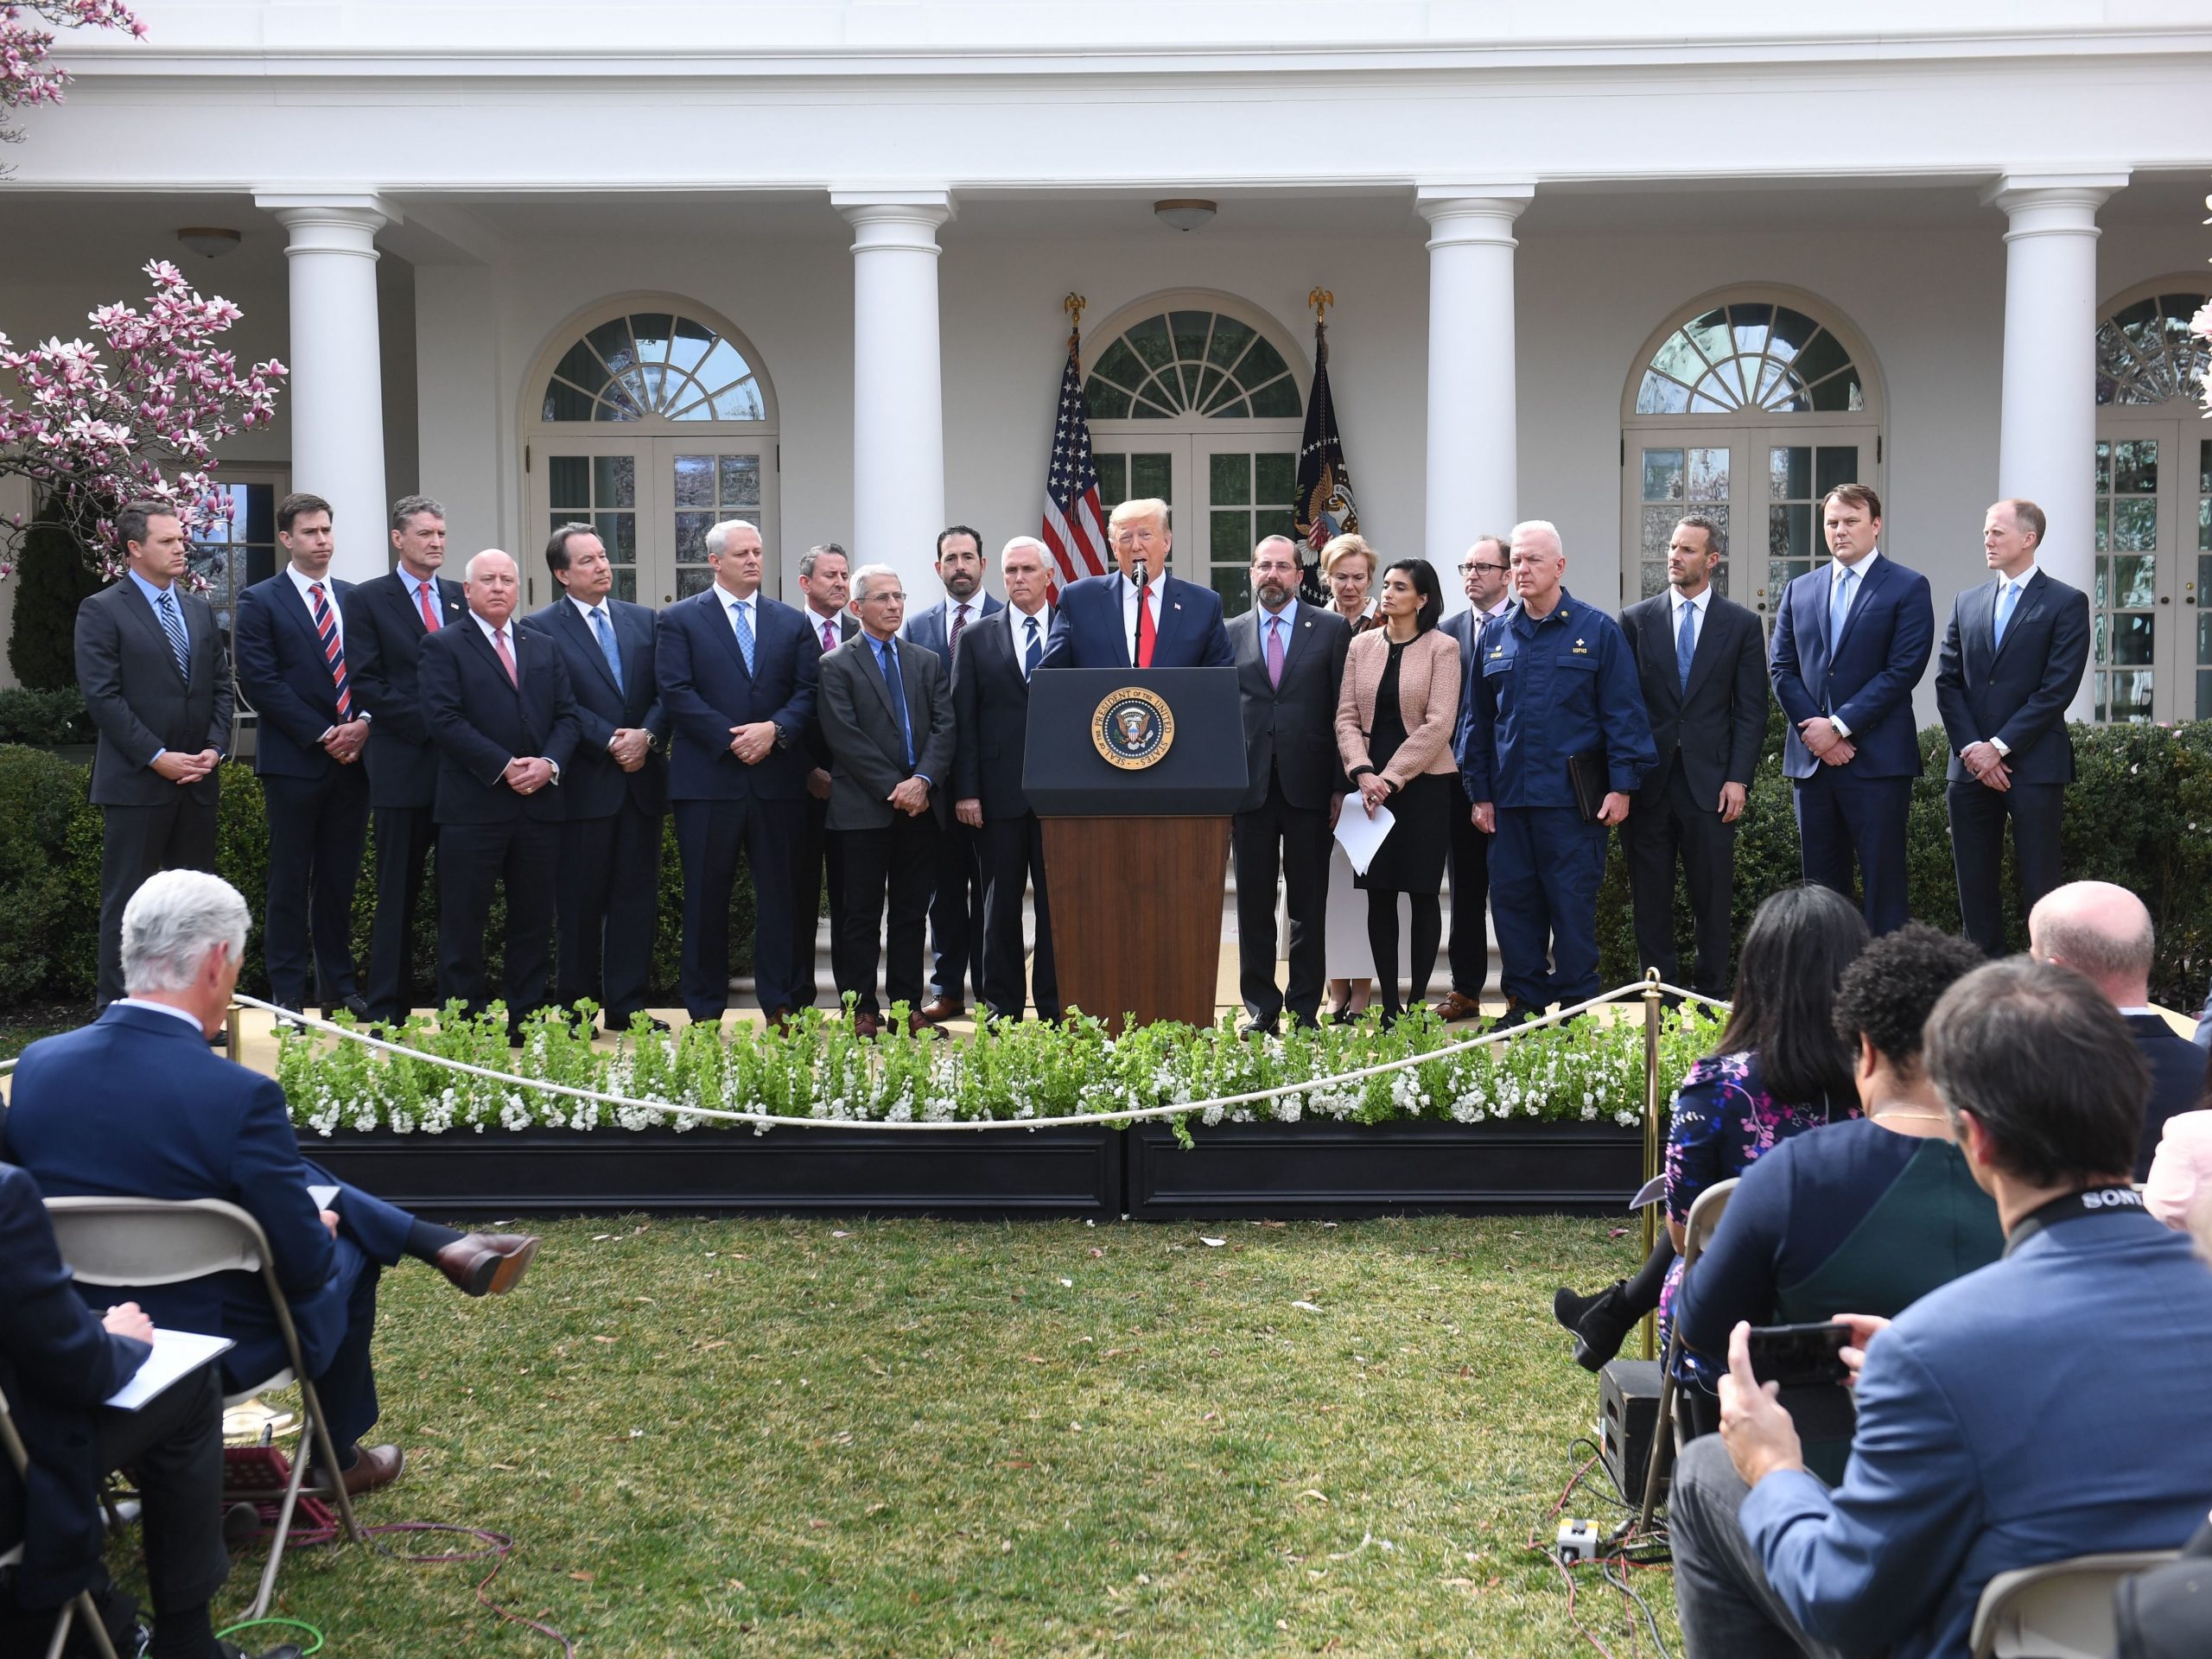 Surrounded by some of the members of the White House Coronavirus Task Force, President Donald Trump speaks at a press conference on COVID-19 in the Rose Garden of the White House on March 13. Of the 27 task force members, two are women, standing to Trump's left: Dr. Deborah Birx and Seema Verna (holding the sheath of papers).